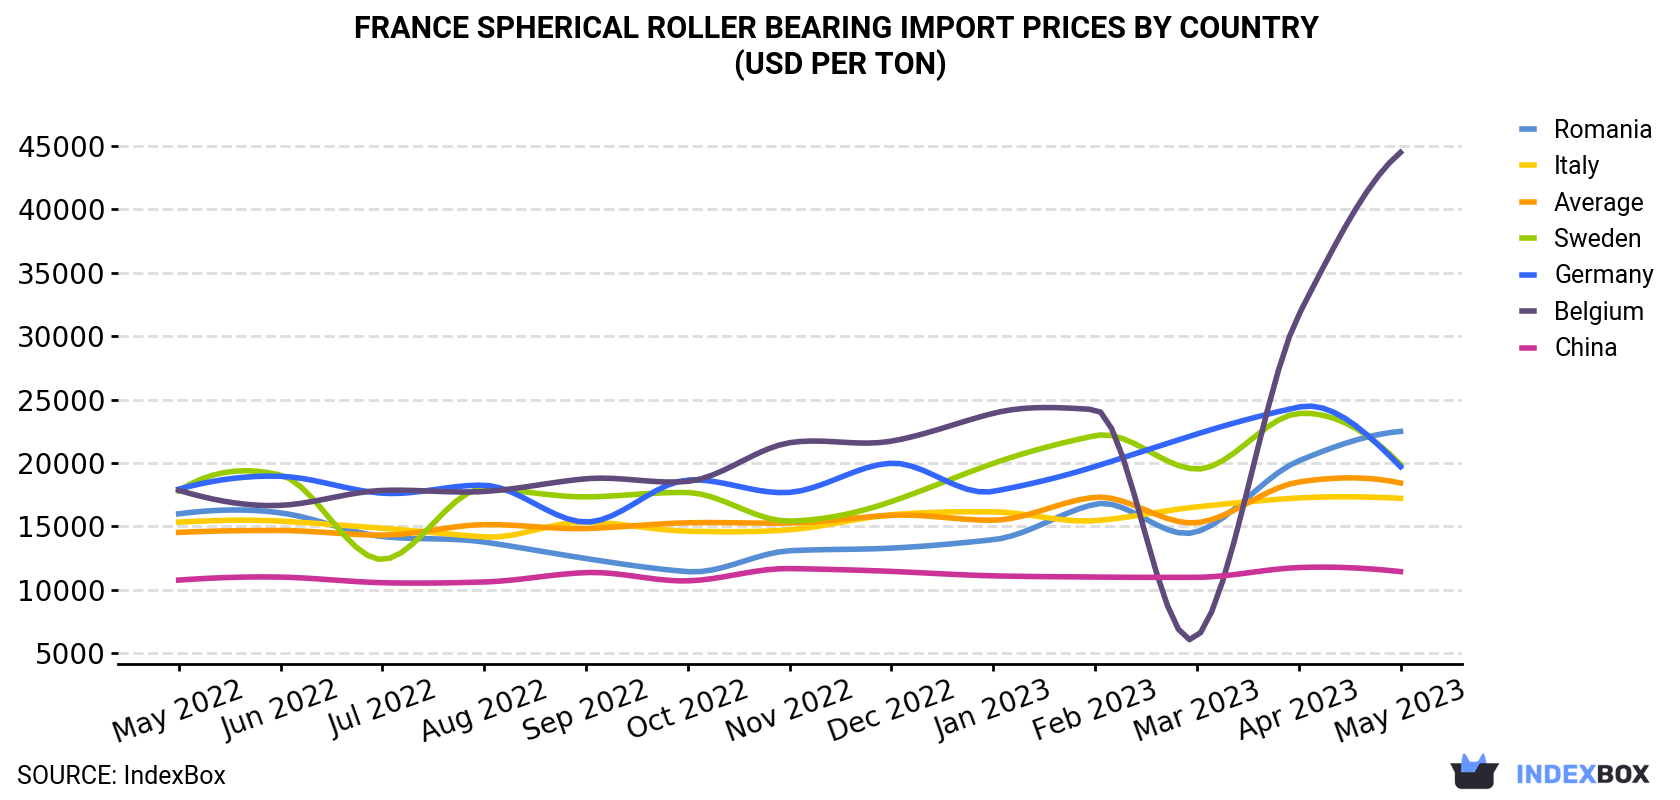 France Spherical Roller Bearing Import Prices By Country (USD Per Ton)